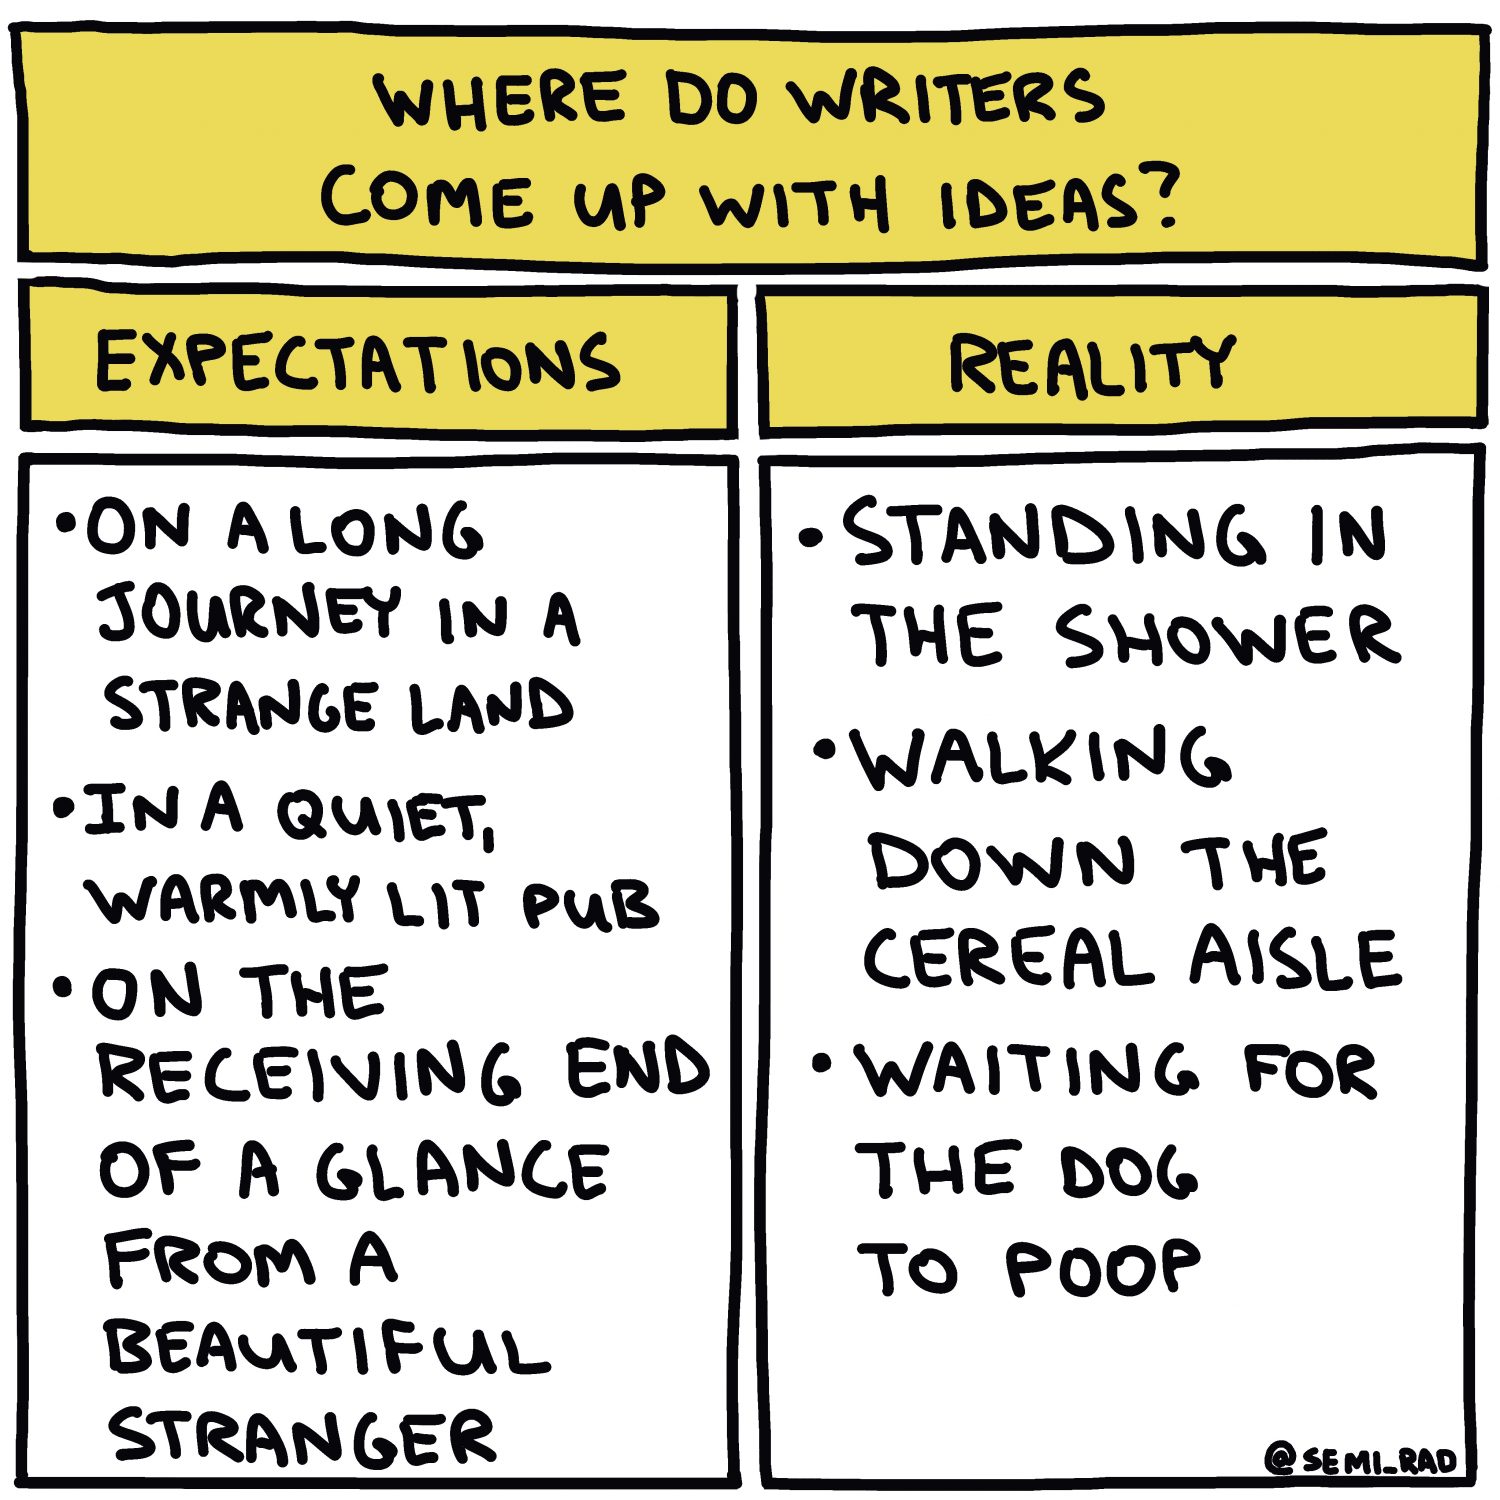 semi-rad chart: Where Do Writers Come Up With Ideas?